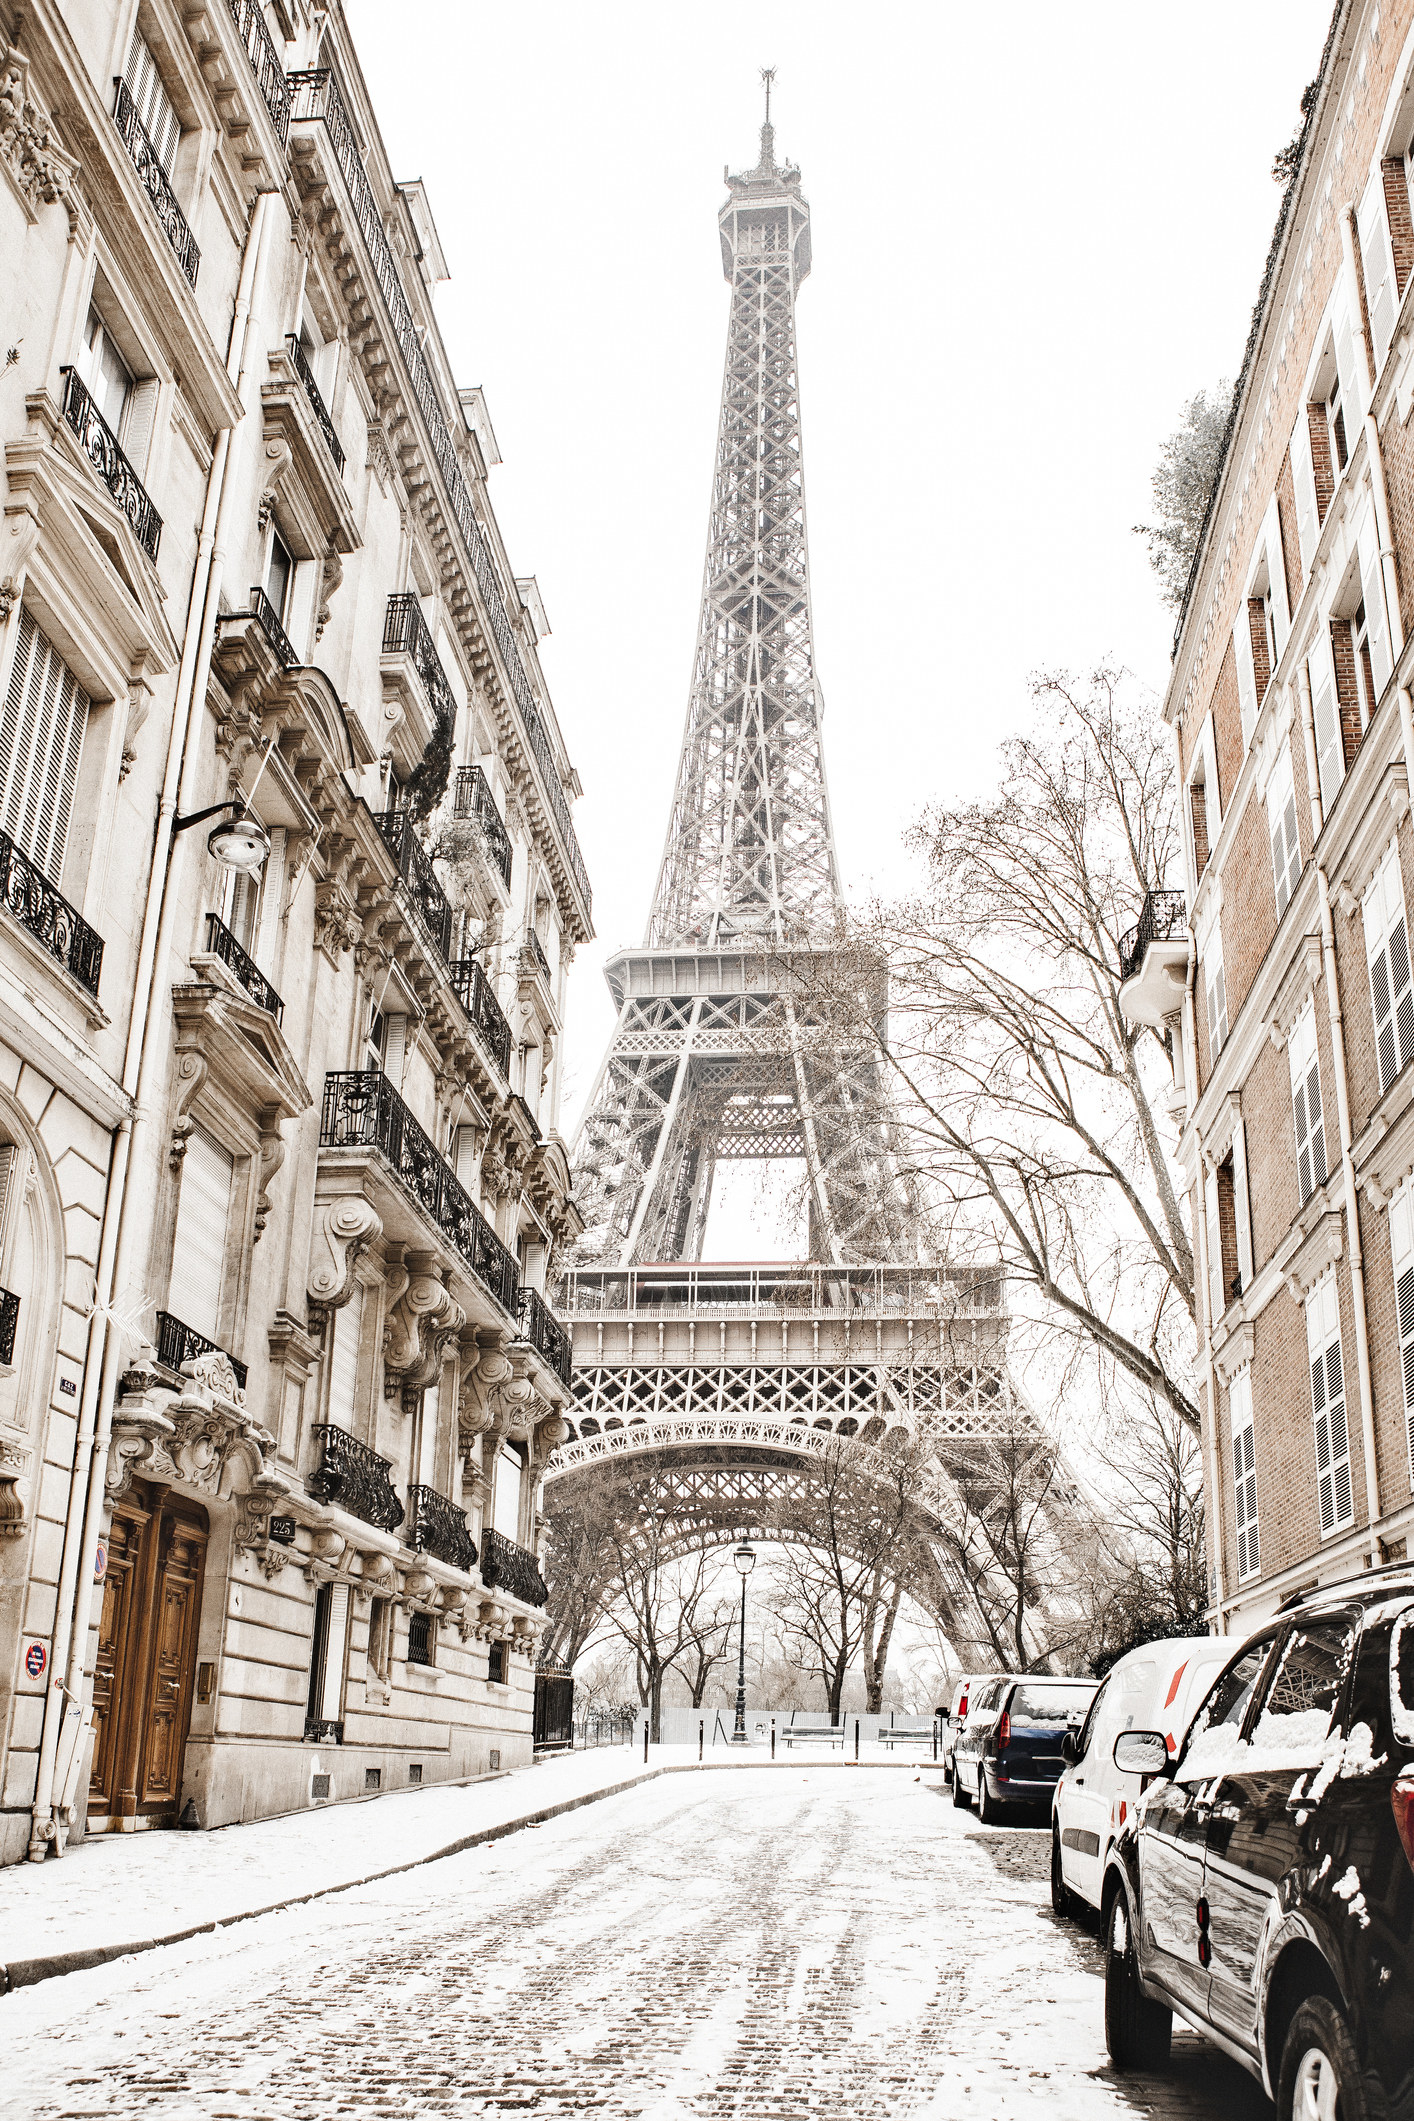 Paris and the Eiffel Tower in the snow